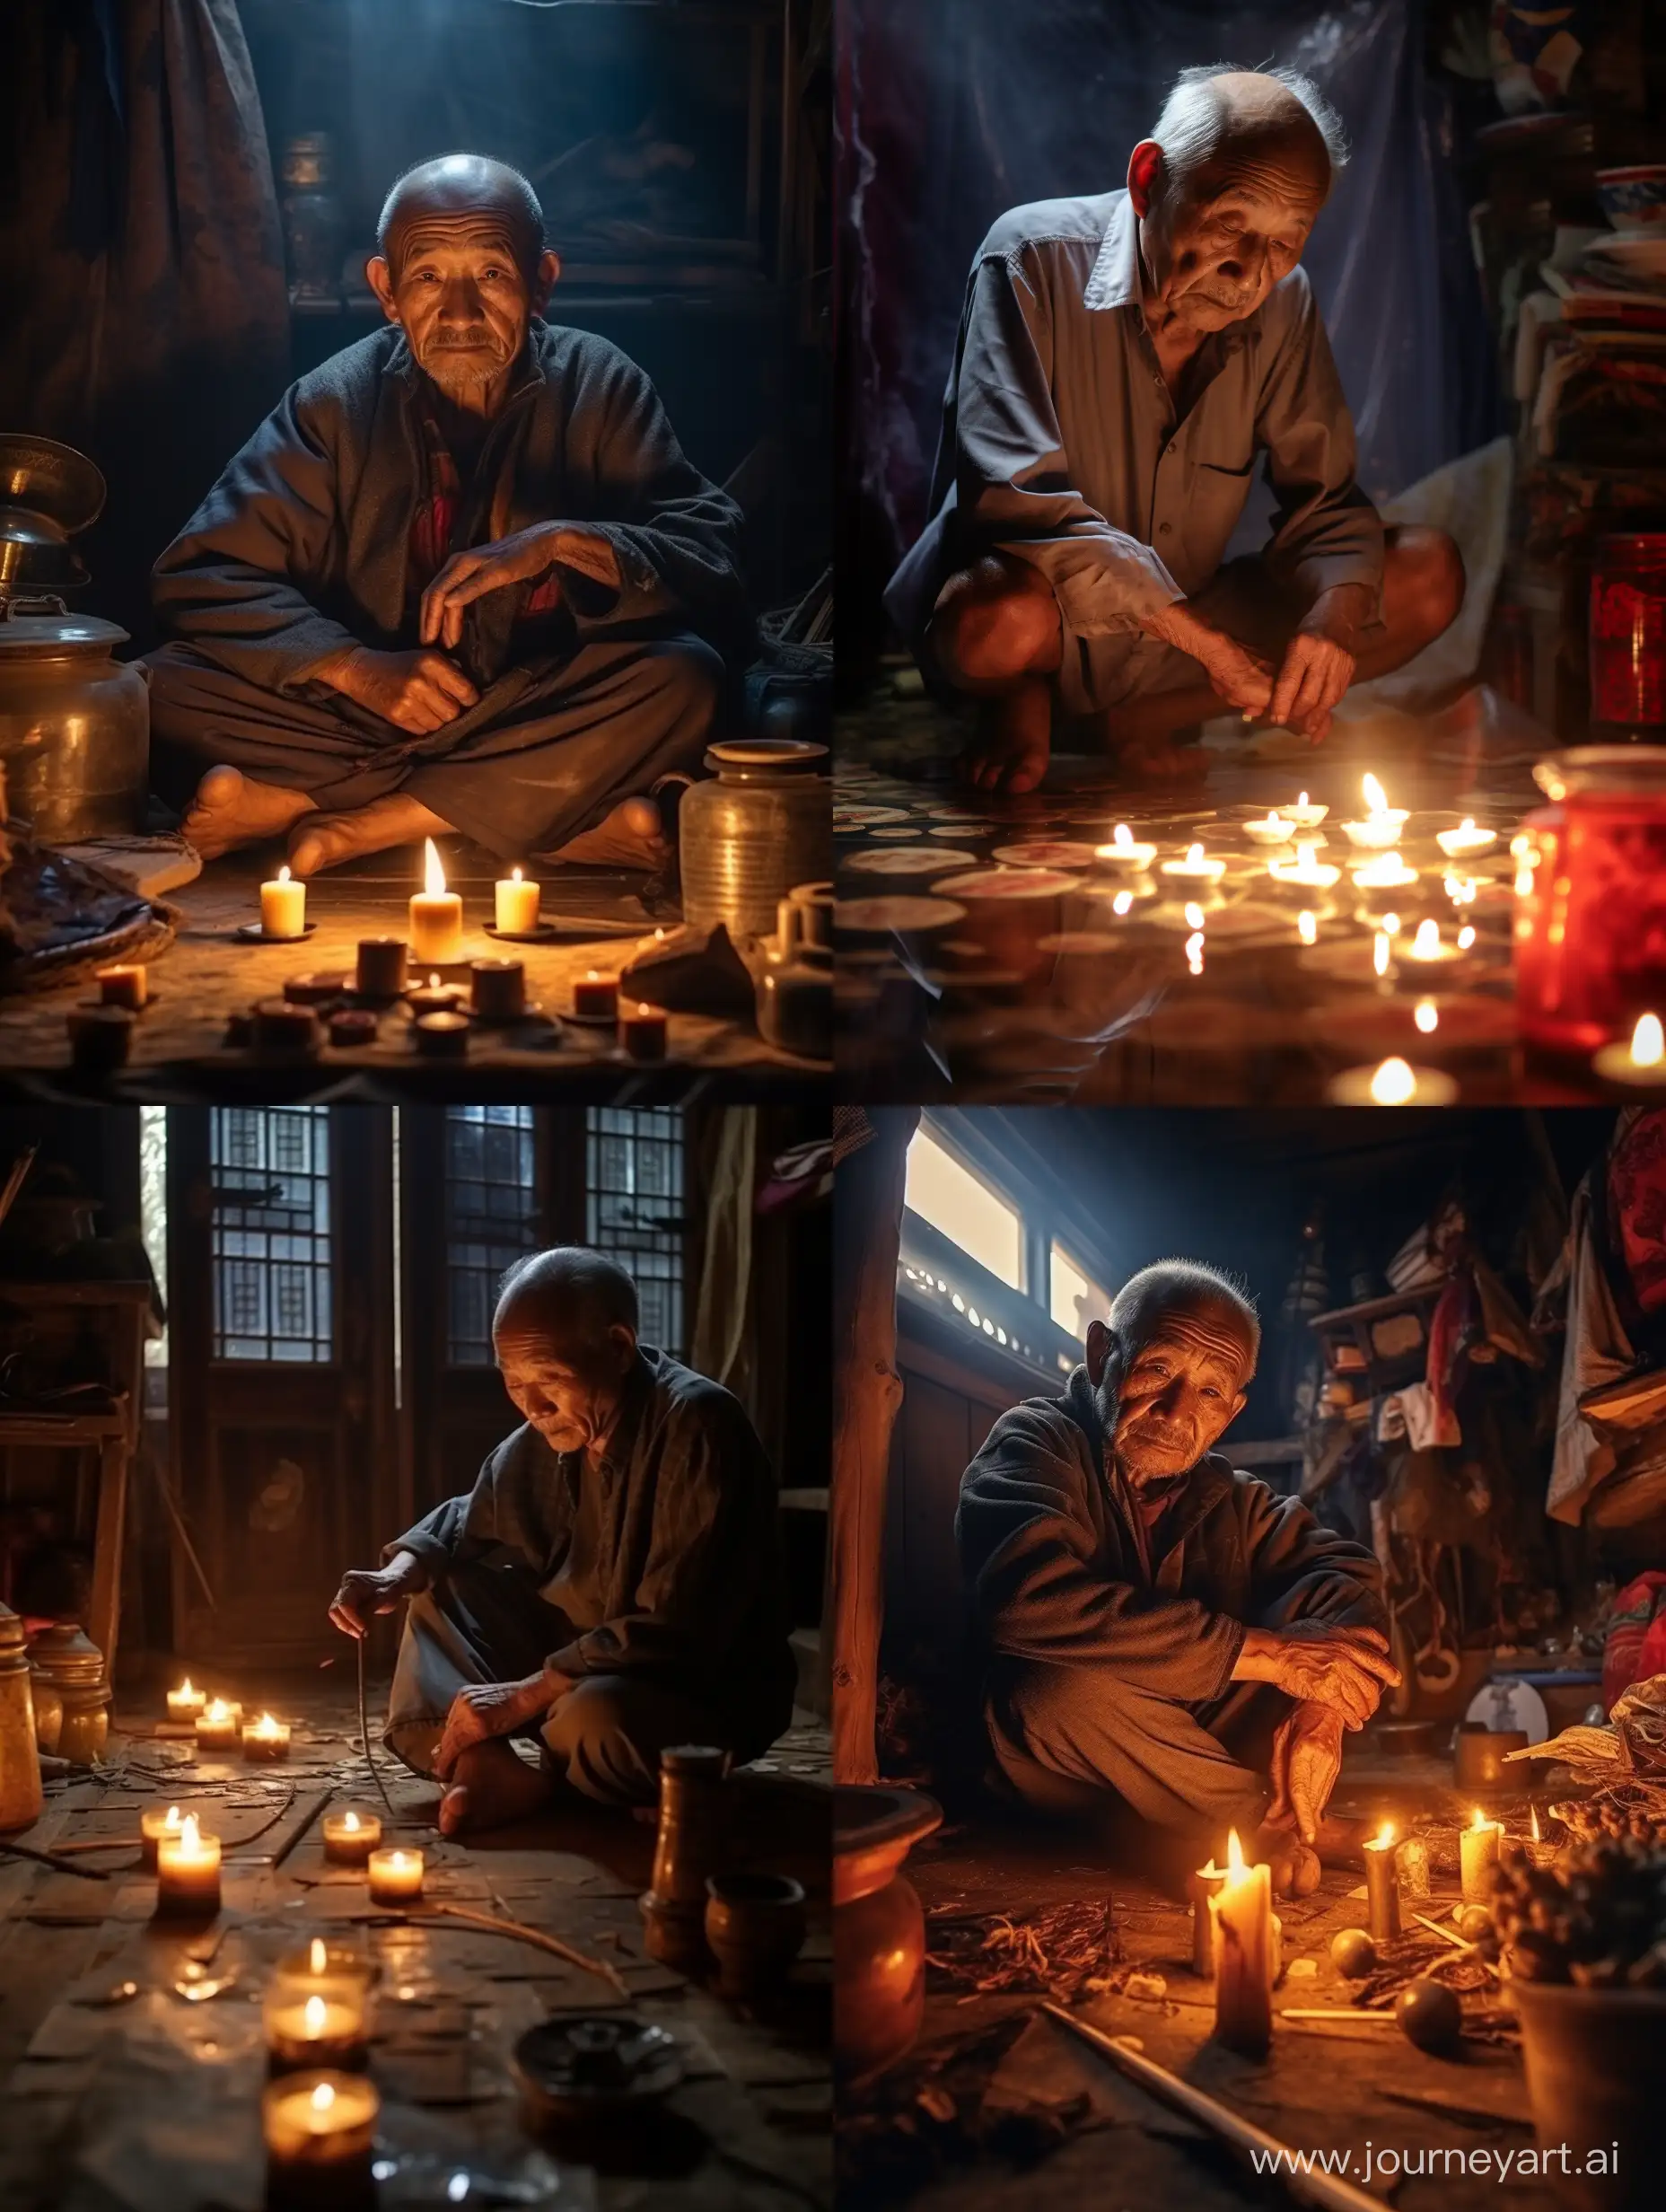 Chinese-Grandfather-Sage-Predicting-Future-in-Candlelit-Room